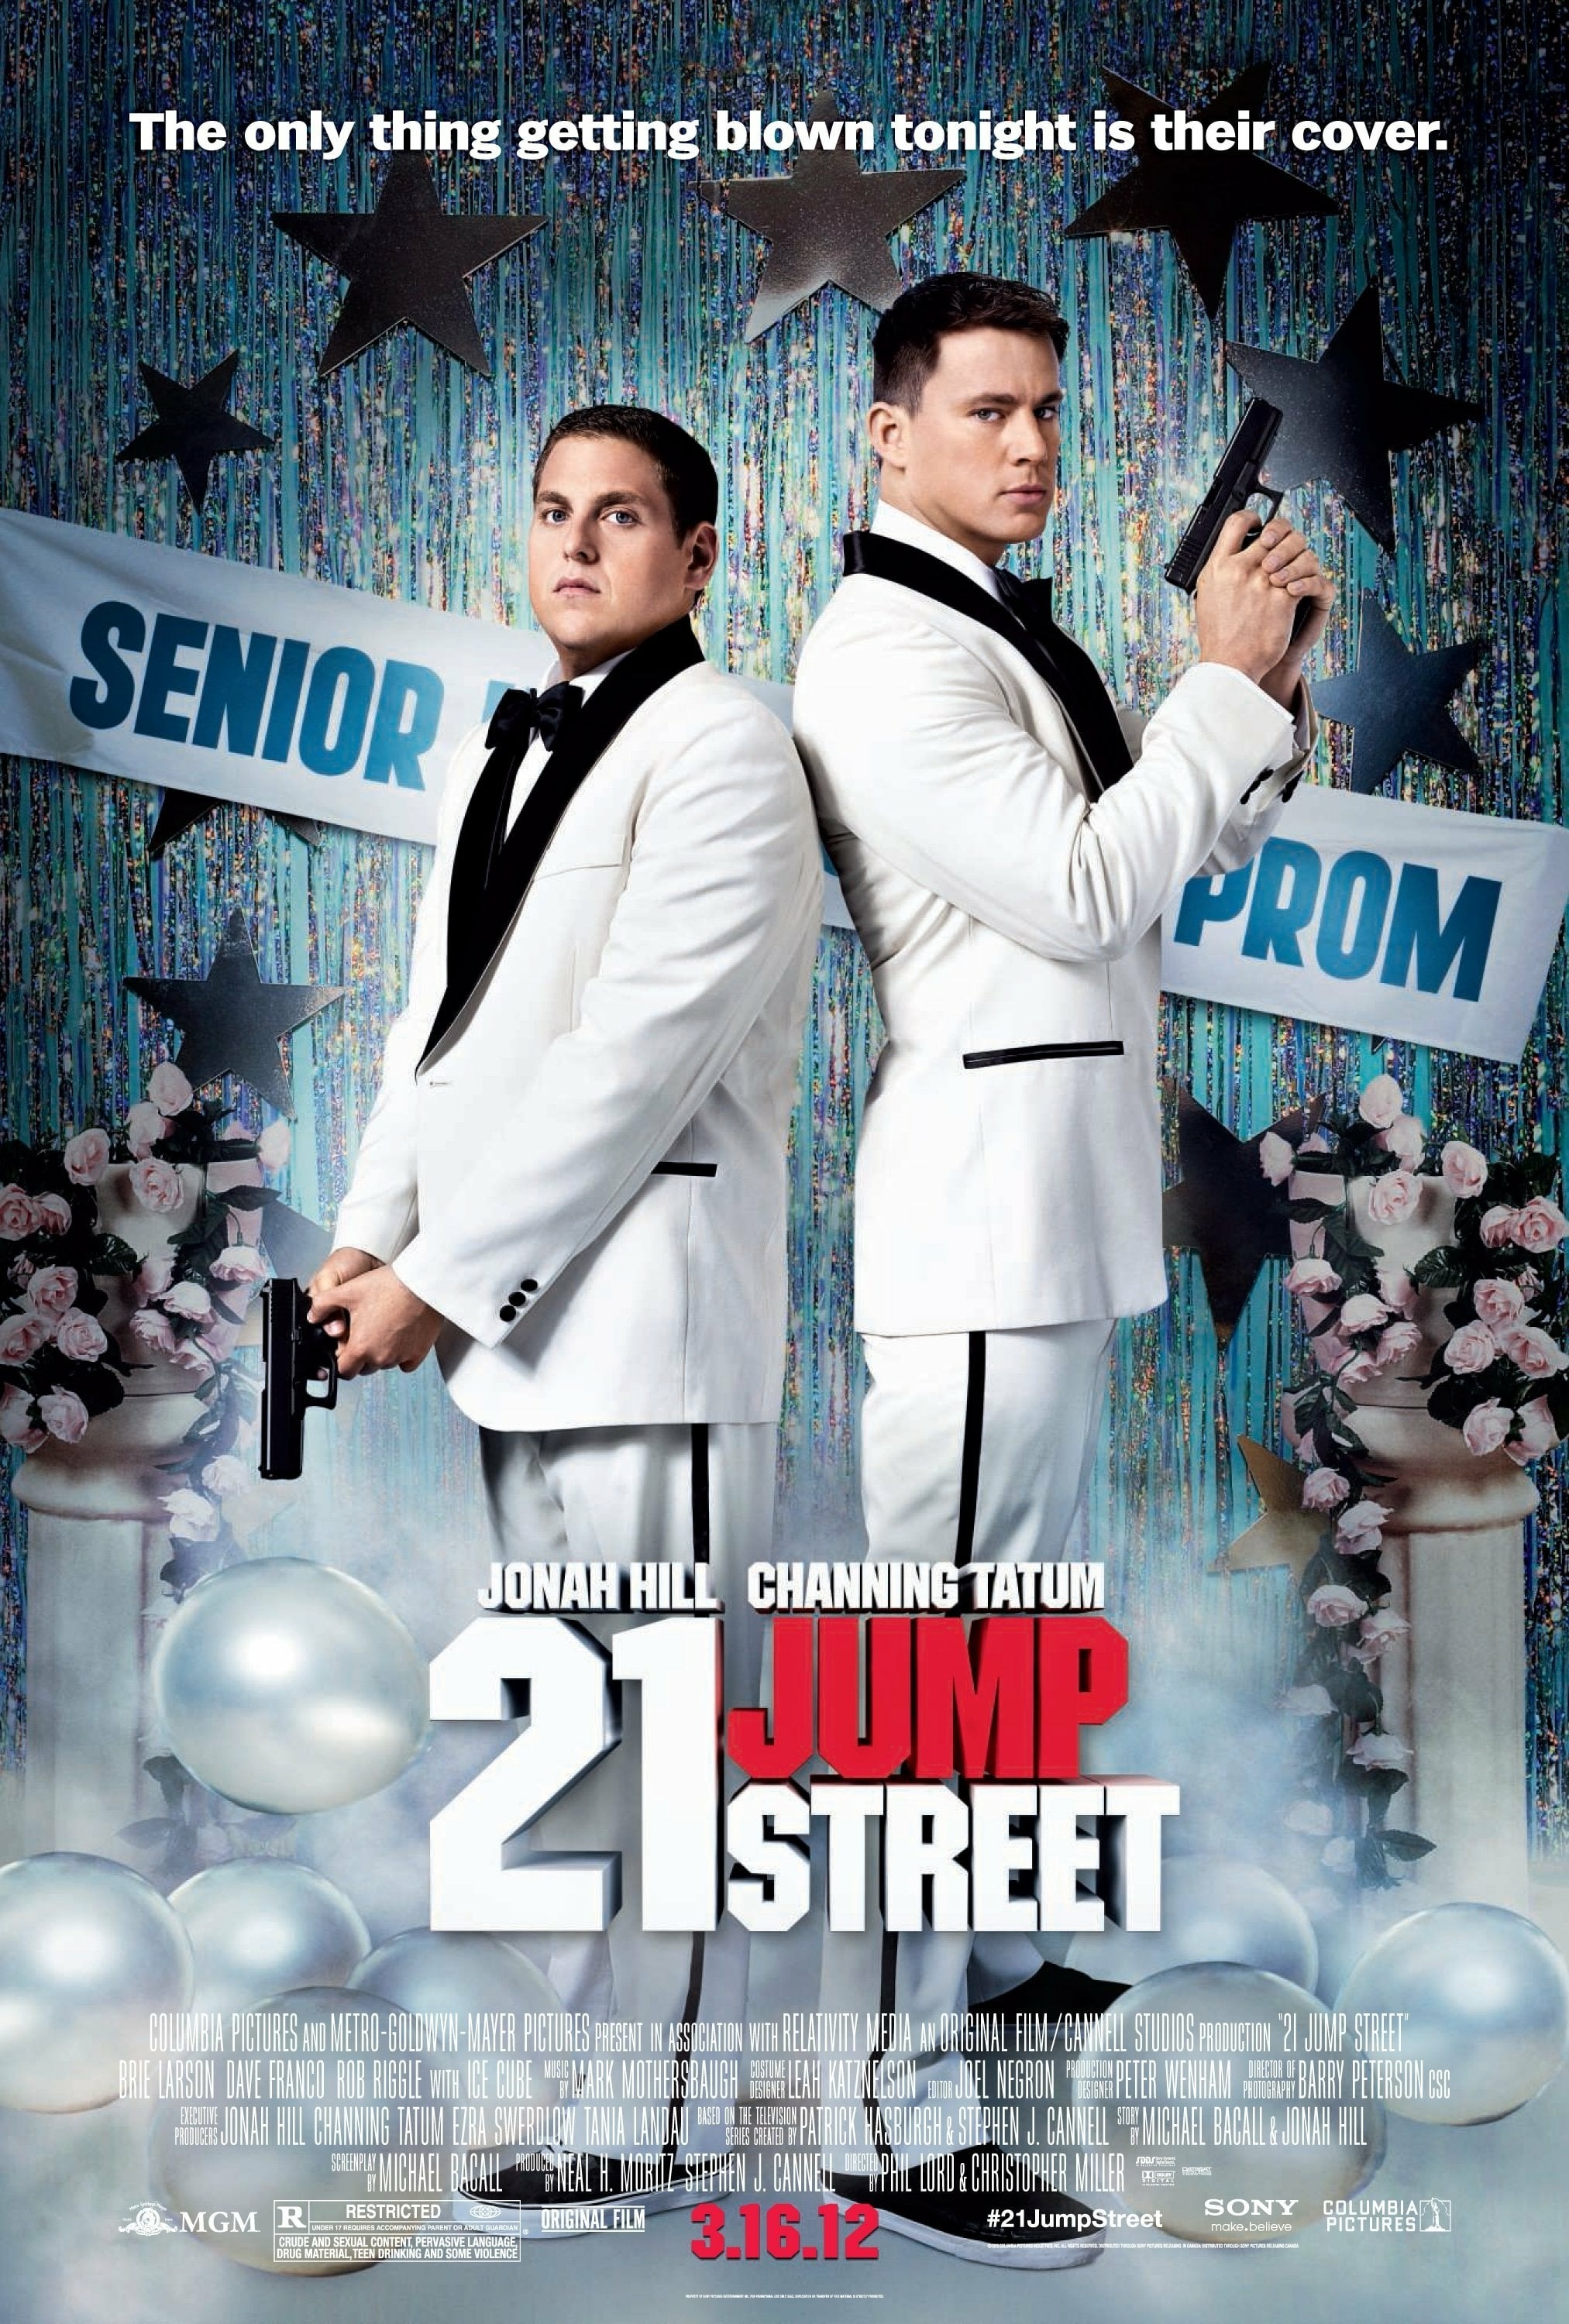 image for 21 jump street